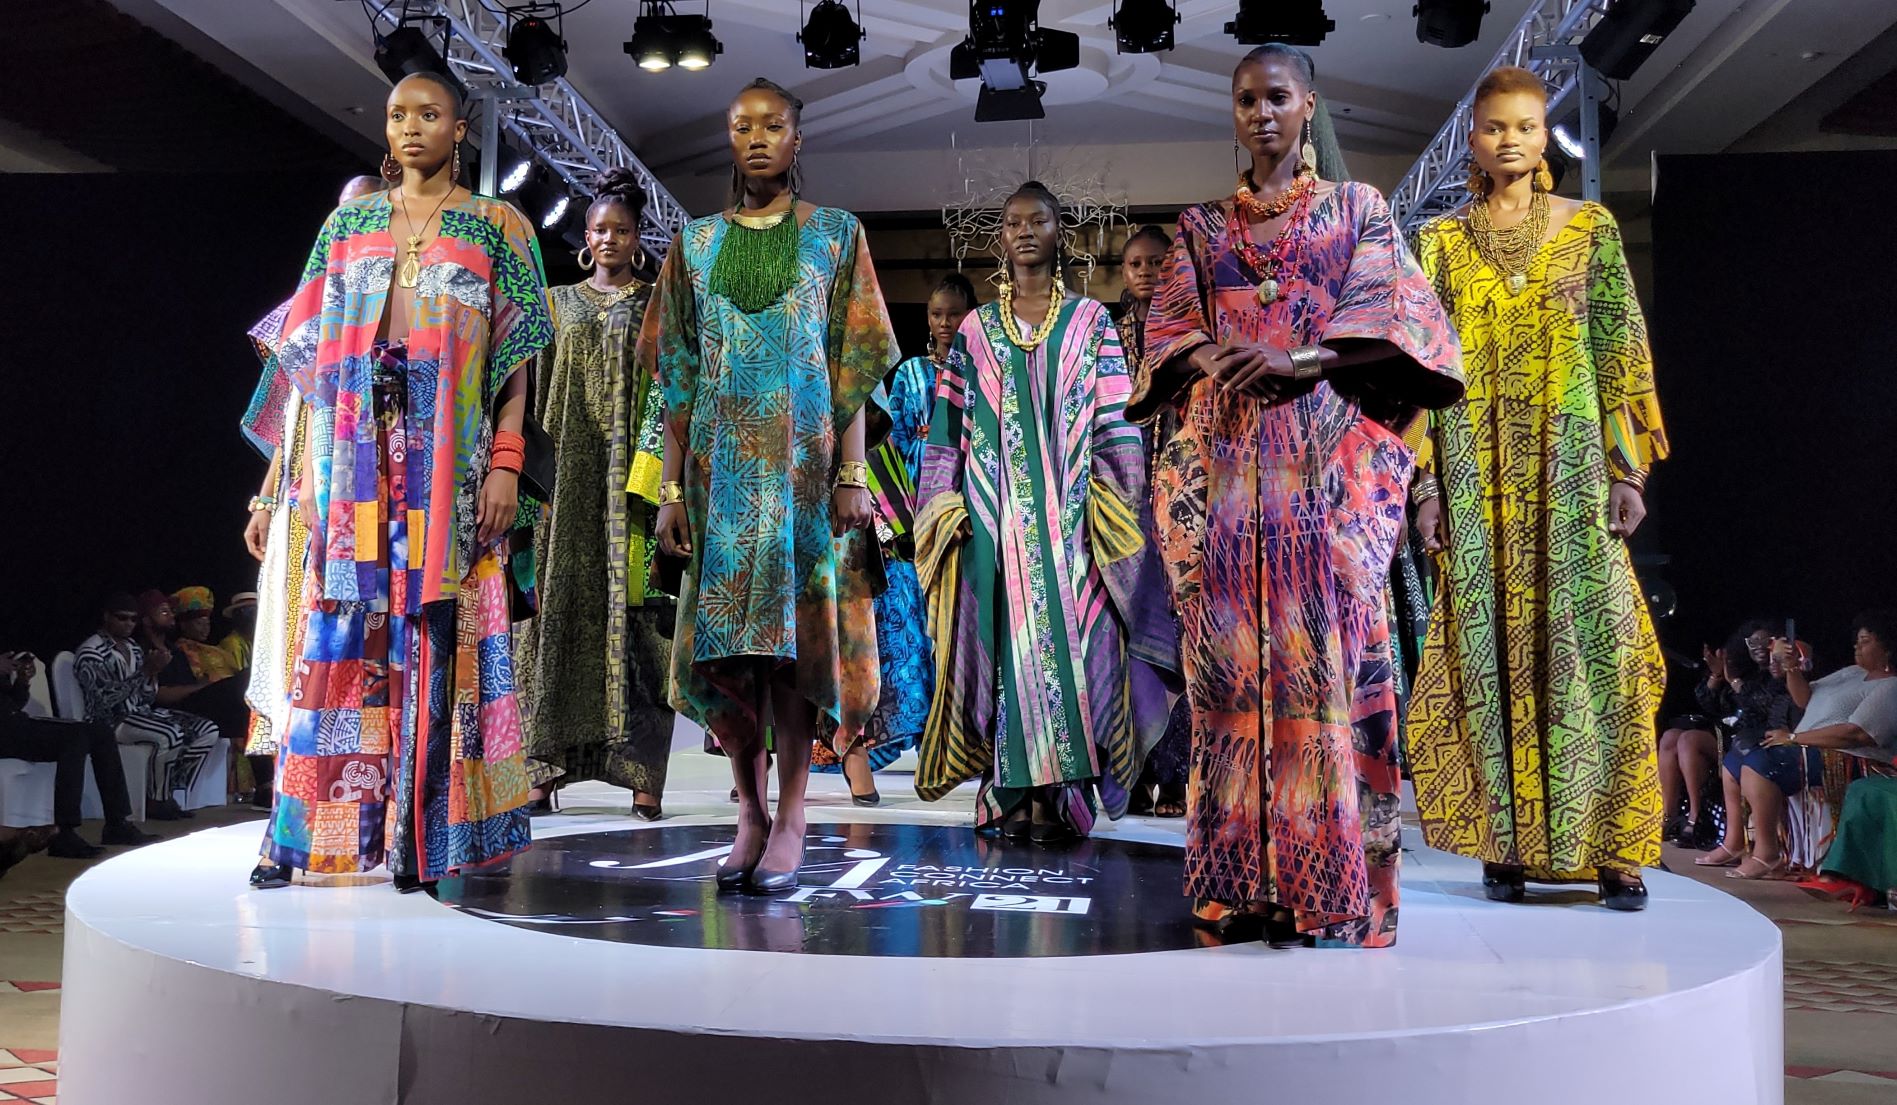 You are currently viewing Highlights from the 2nd Fashion Connect Africa Runway Event